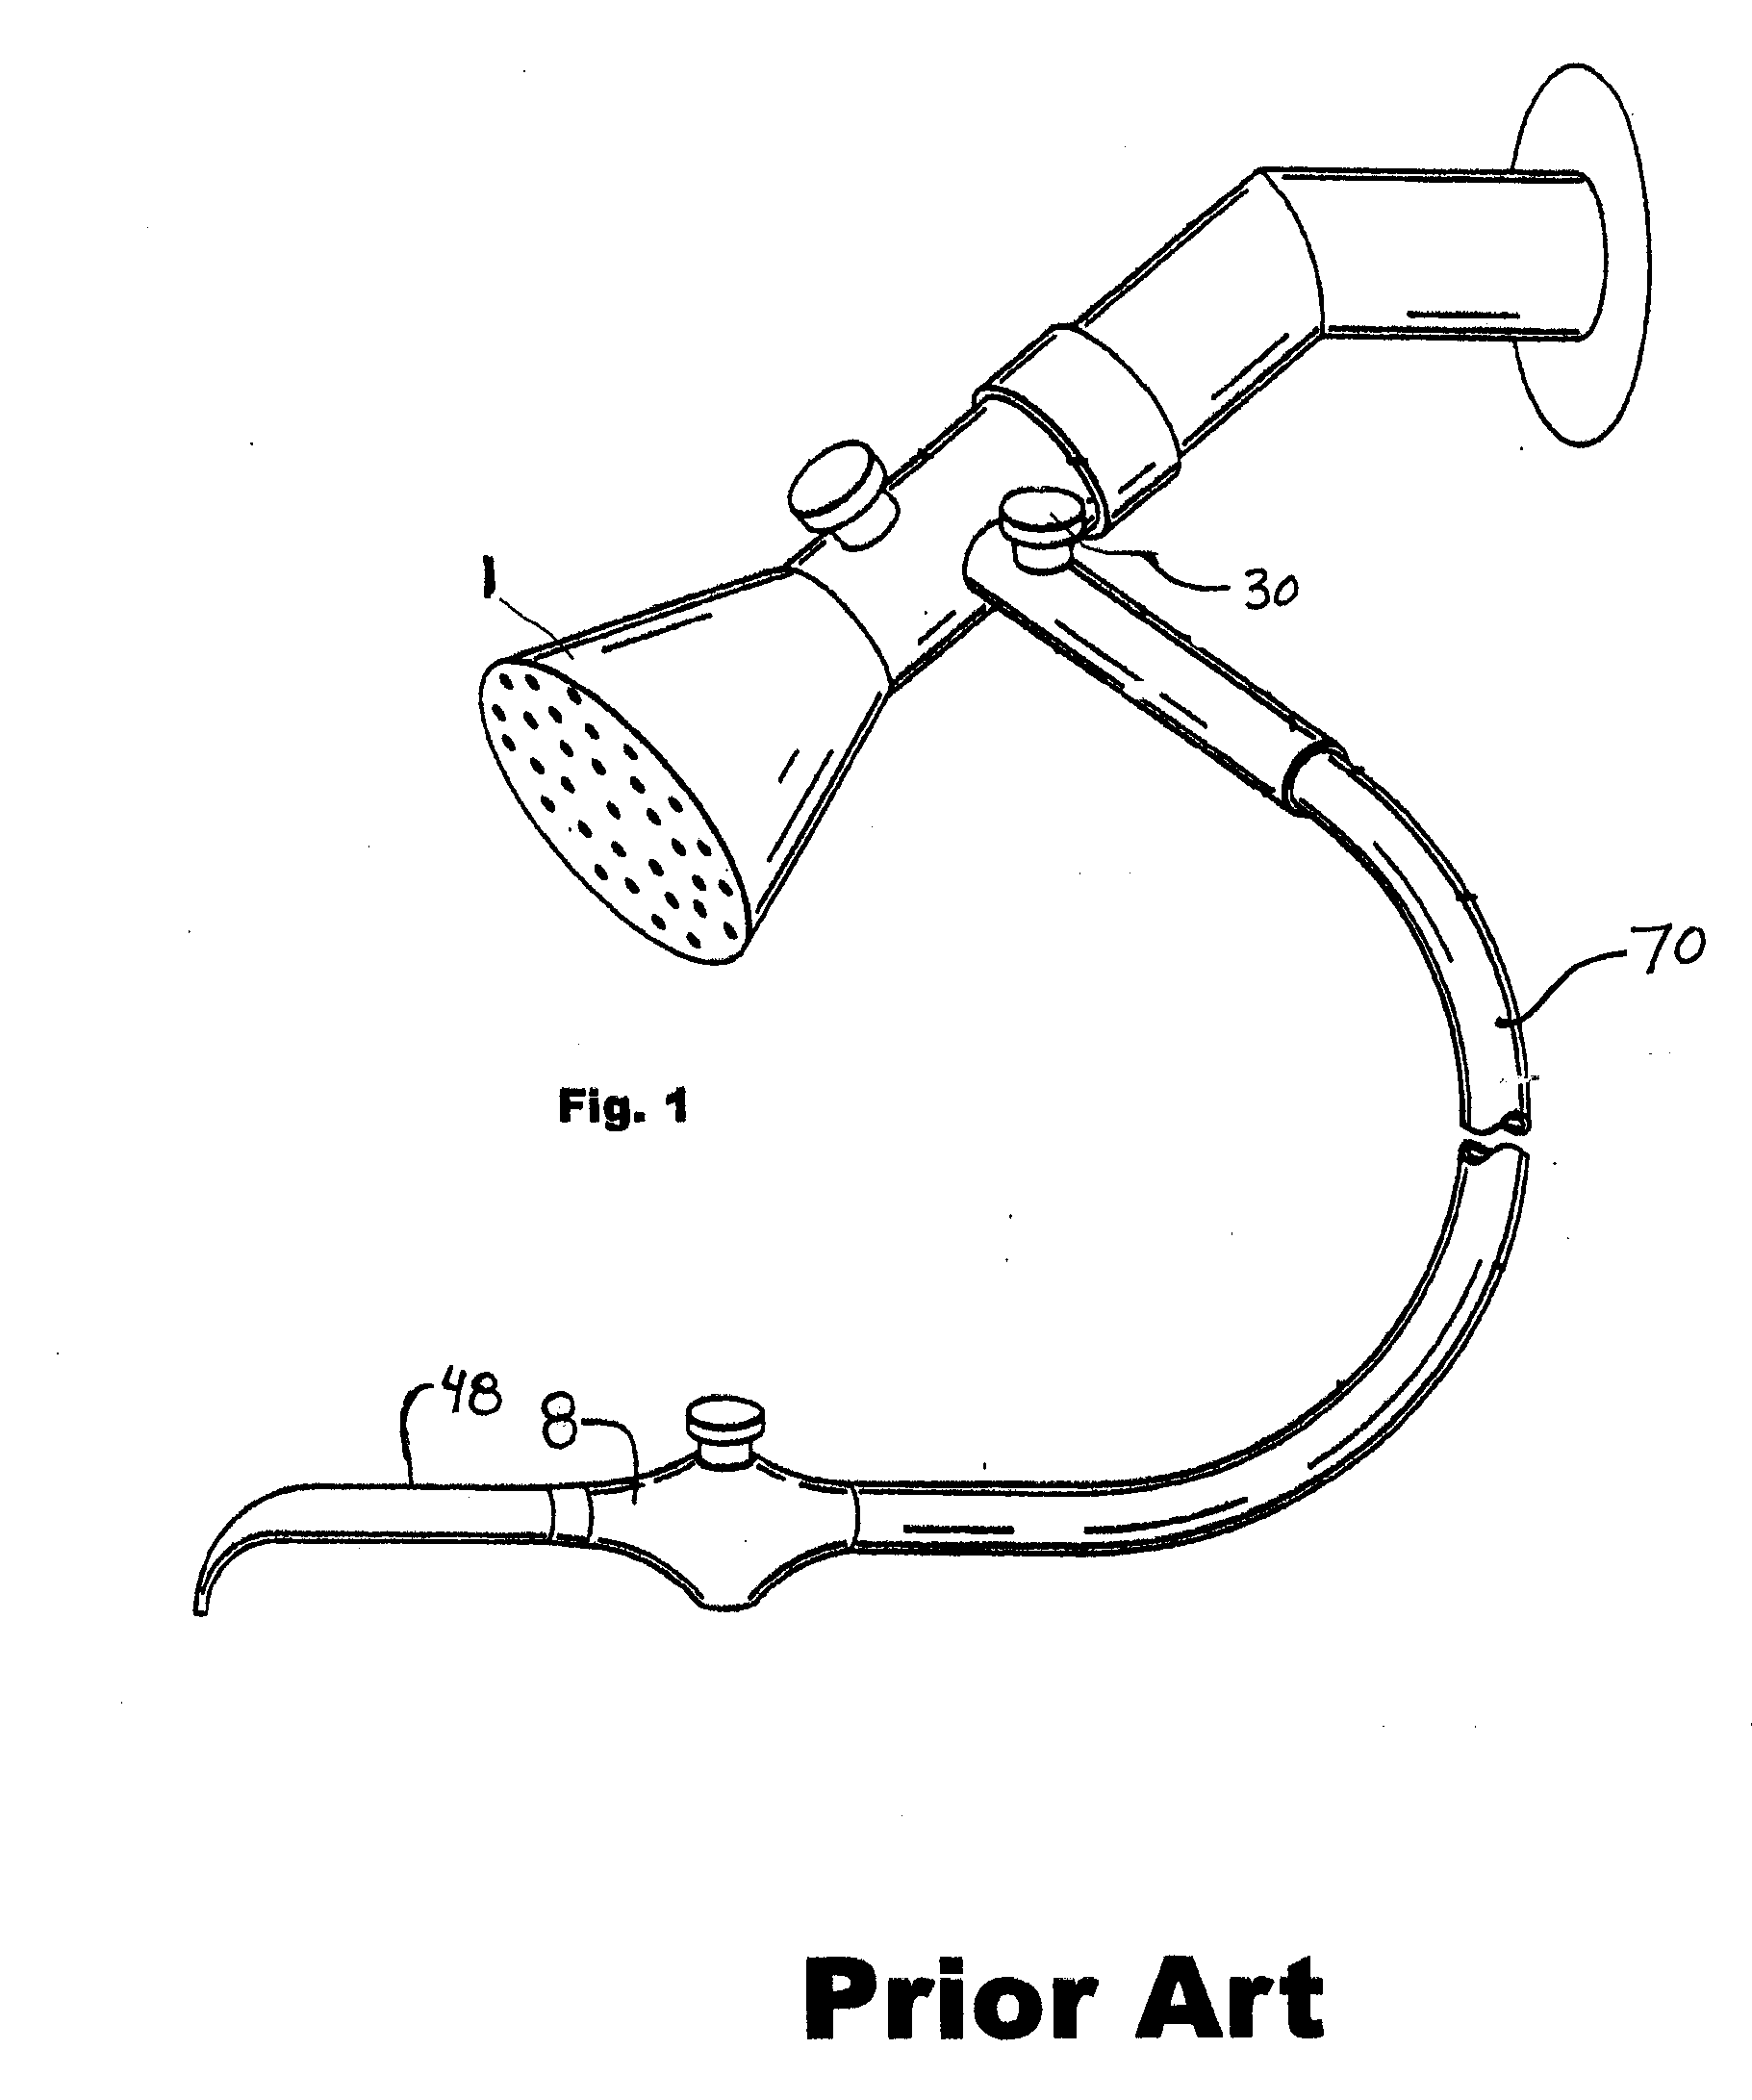 High Efficiency Water Pick Cleaning Apparatus and Showerhead